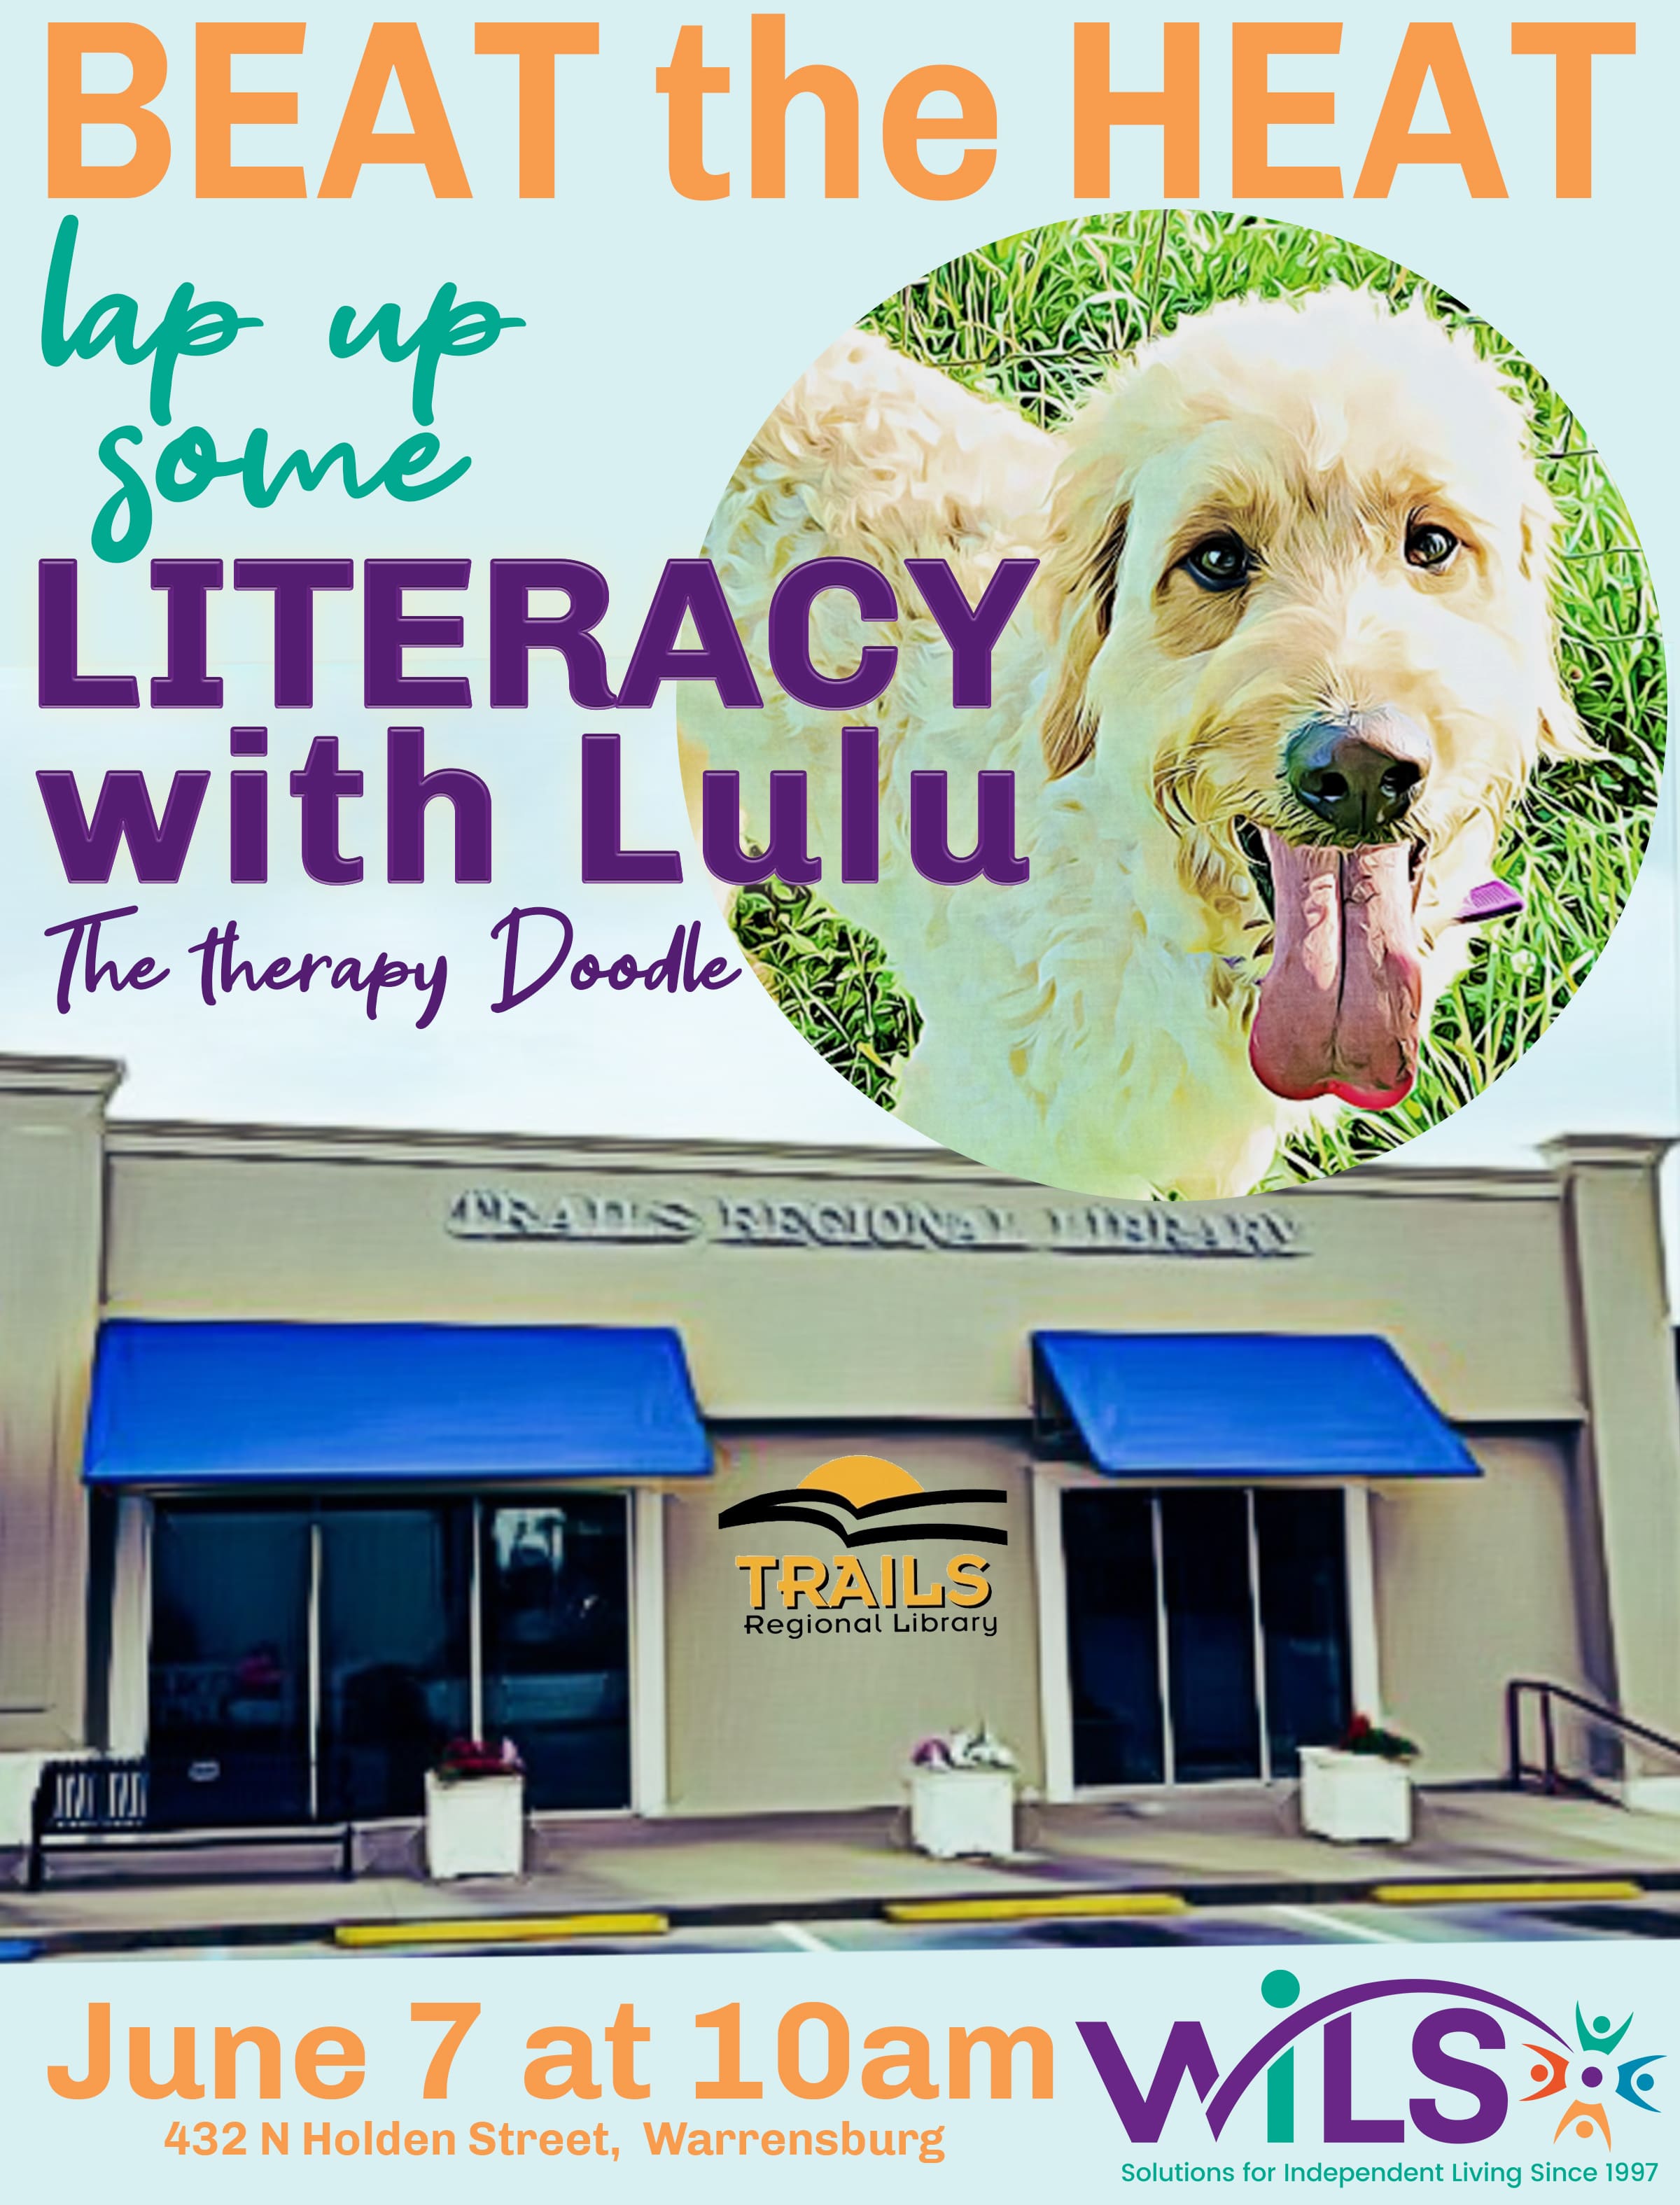 Literacy with Lulu the therapy Doodle @ Trails Regional Library